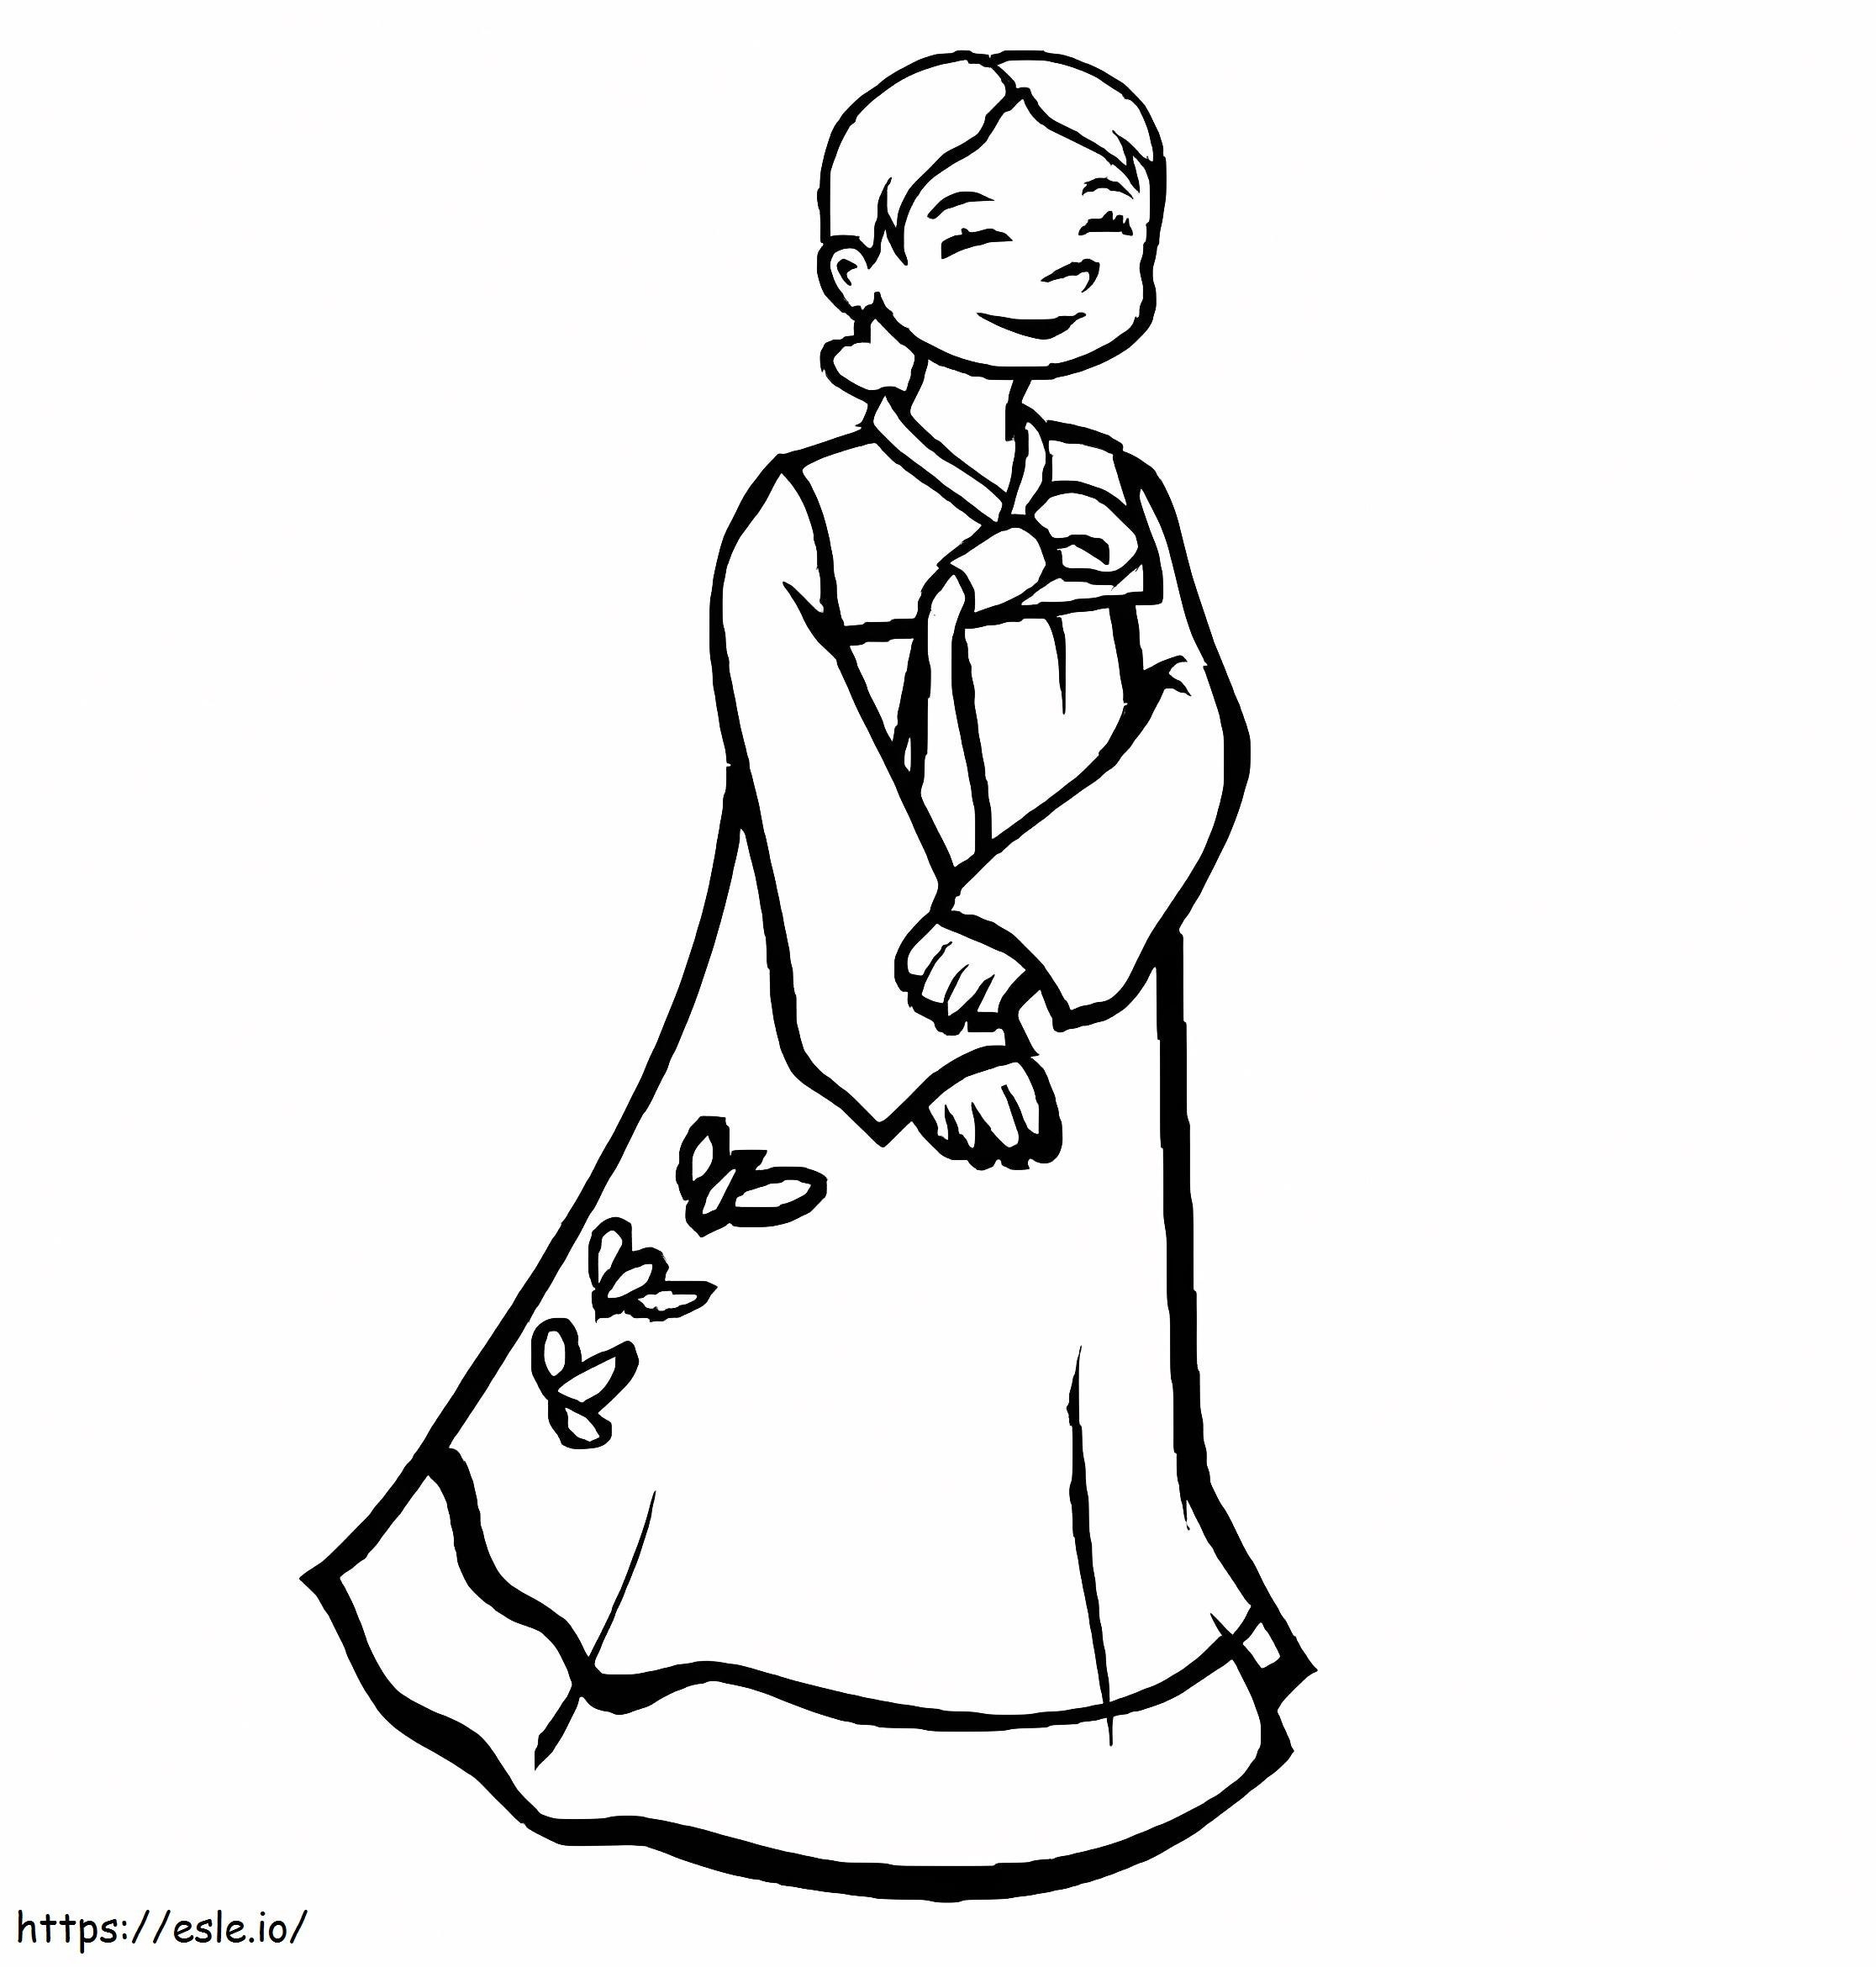 Girl In Hanbok coloring page